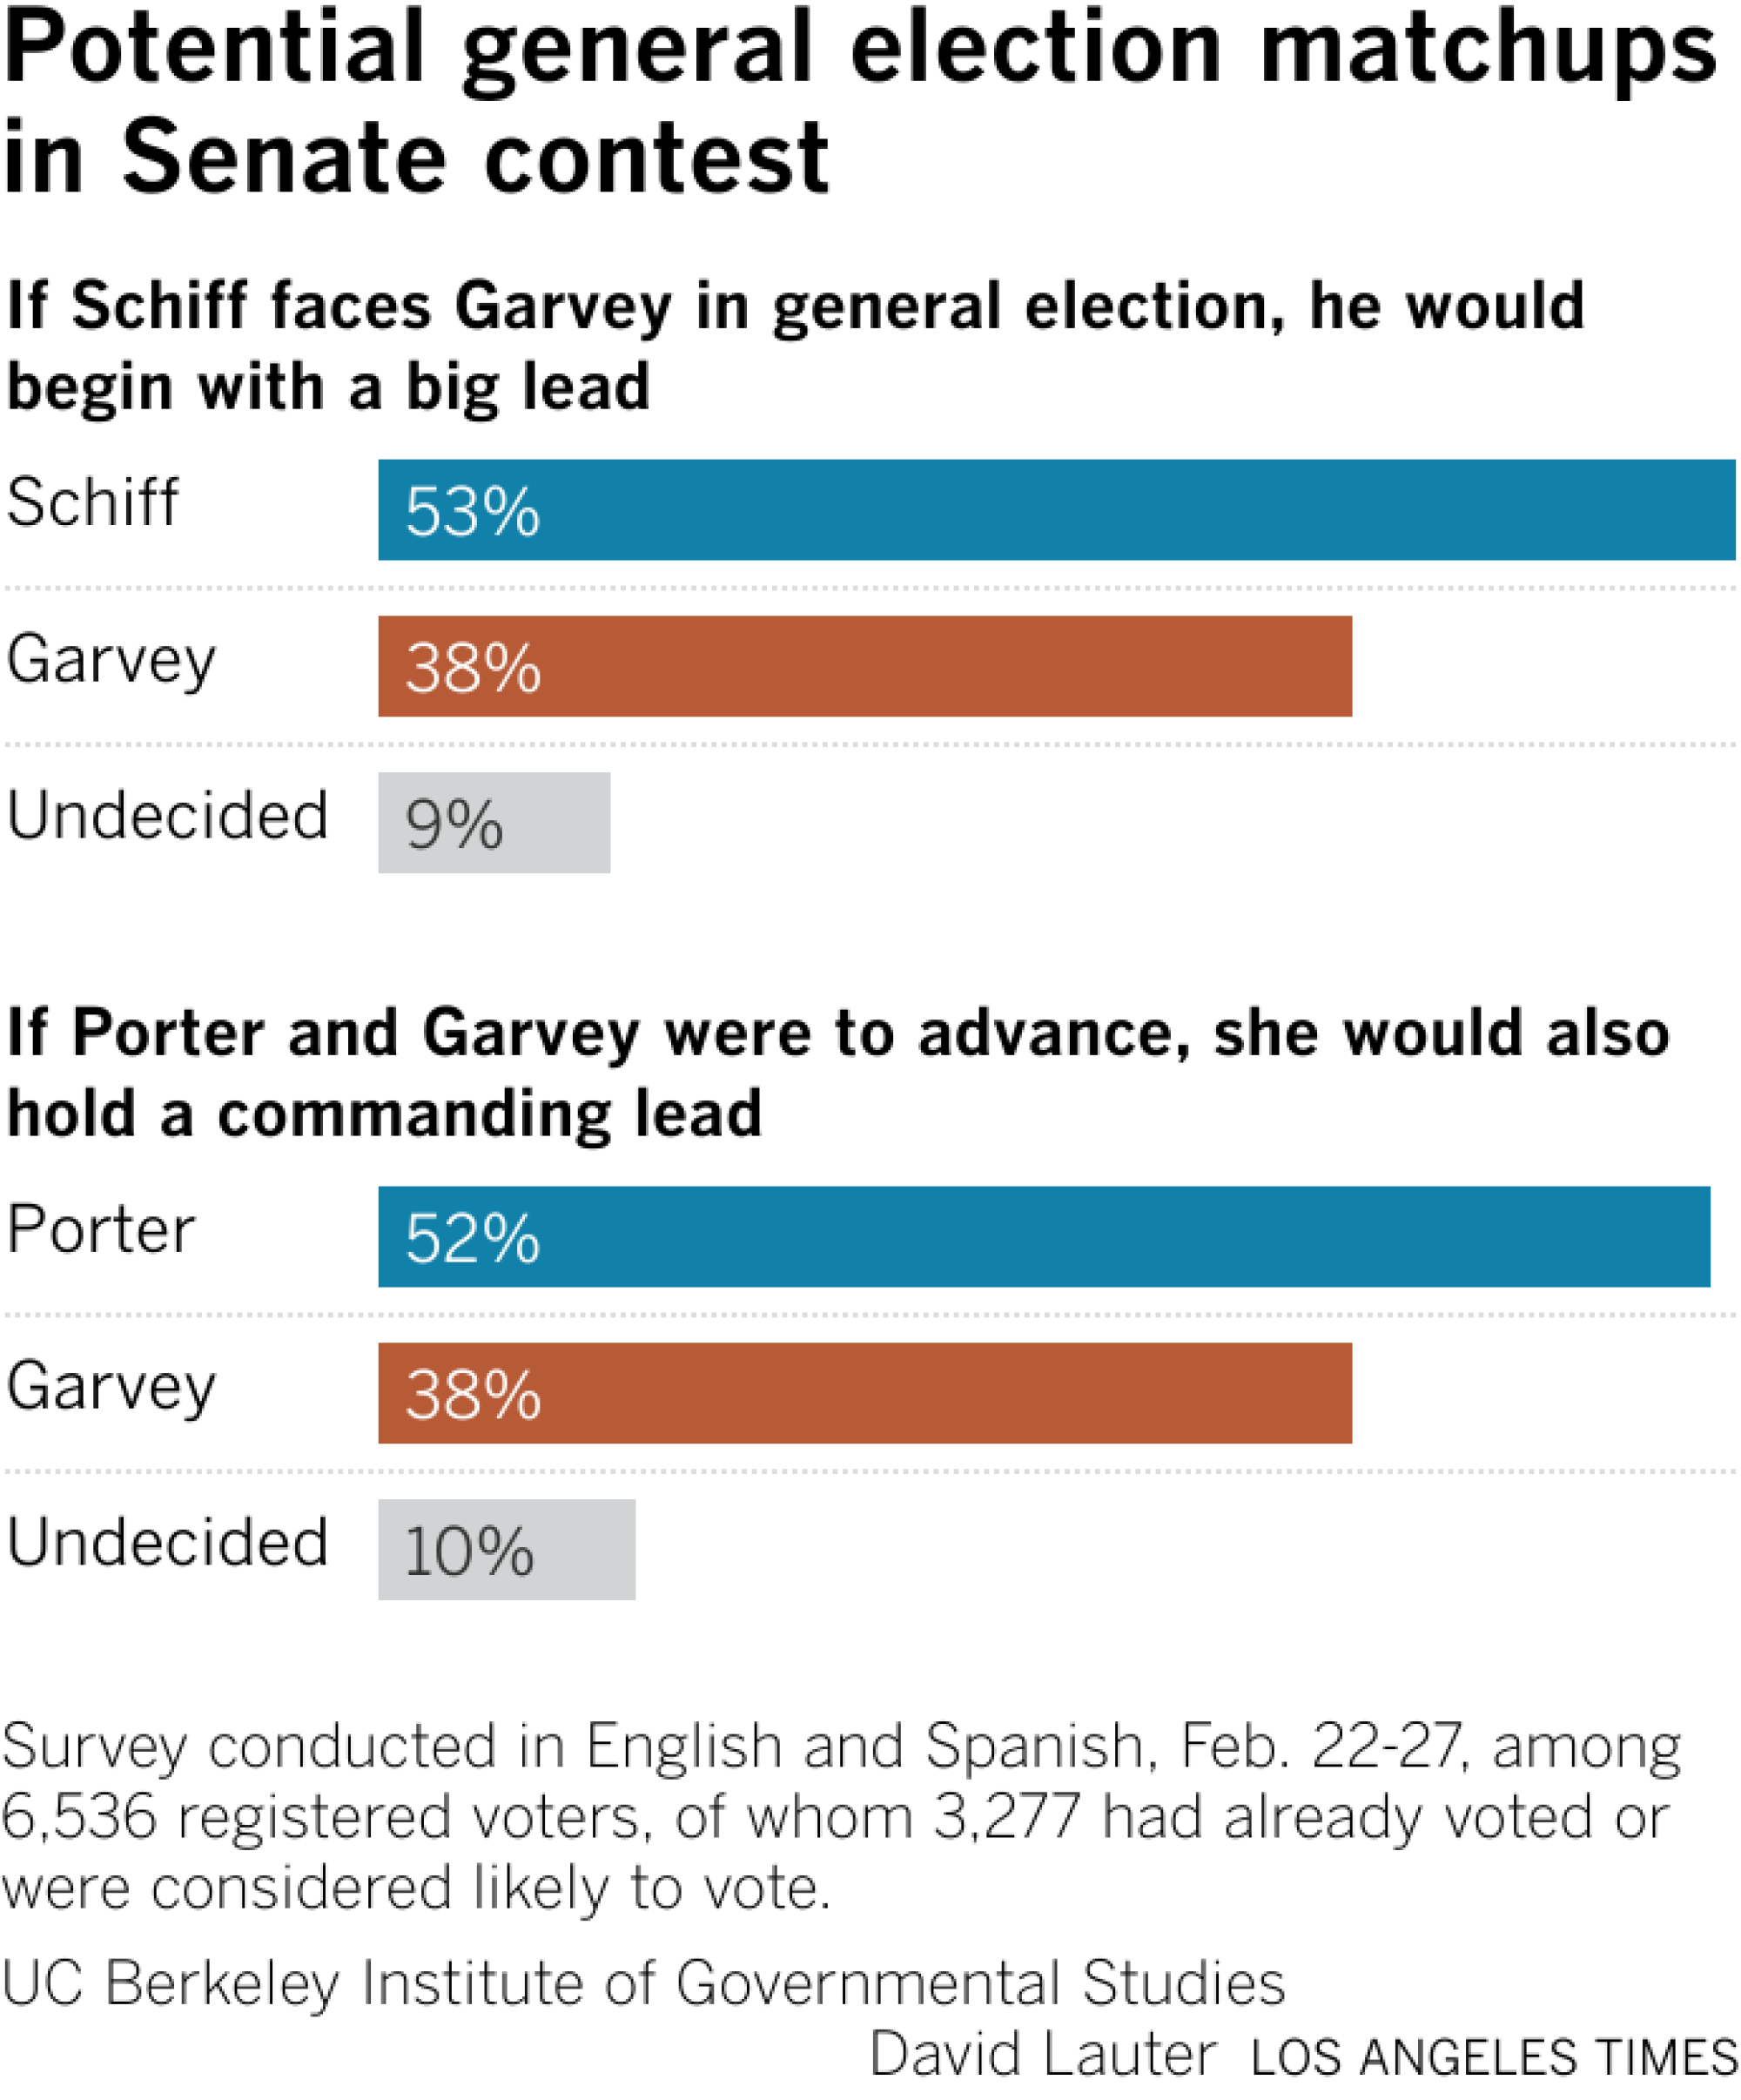 Bar chart shows the proportion of voters supporting Schiff (53%), Garvey (38%), and undecided (9%)